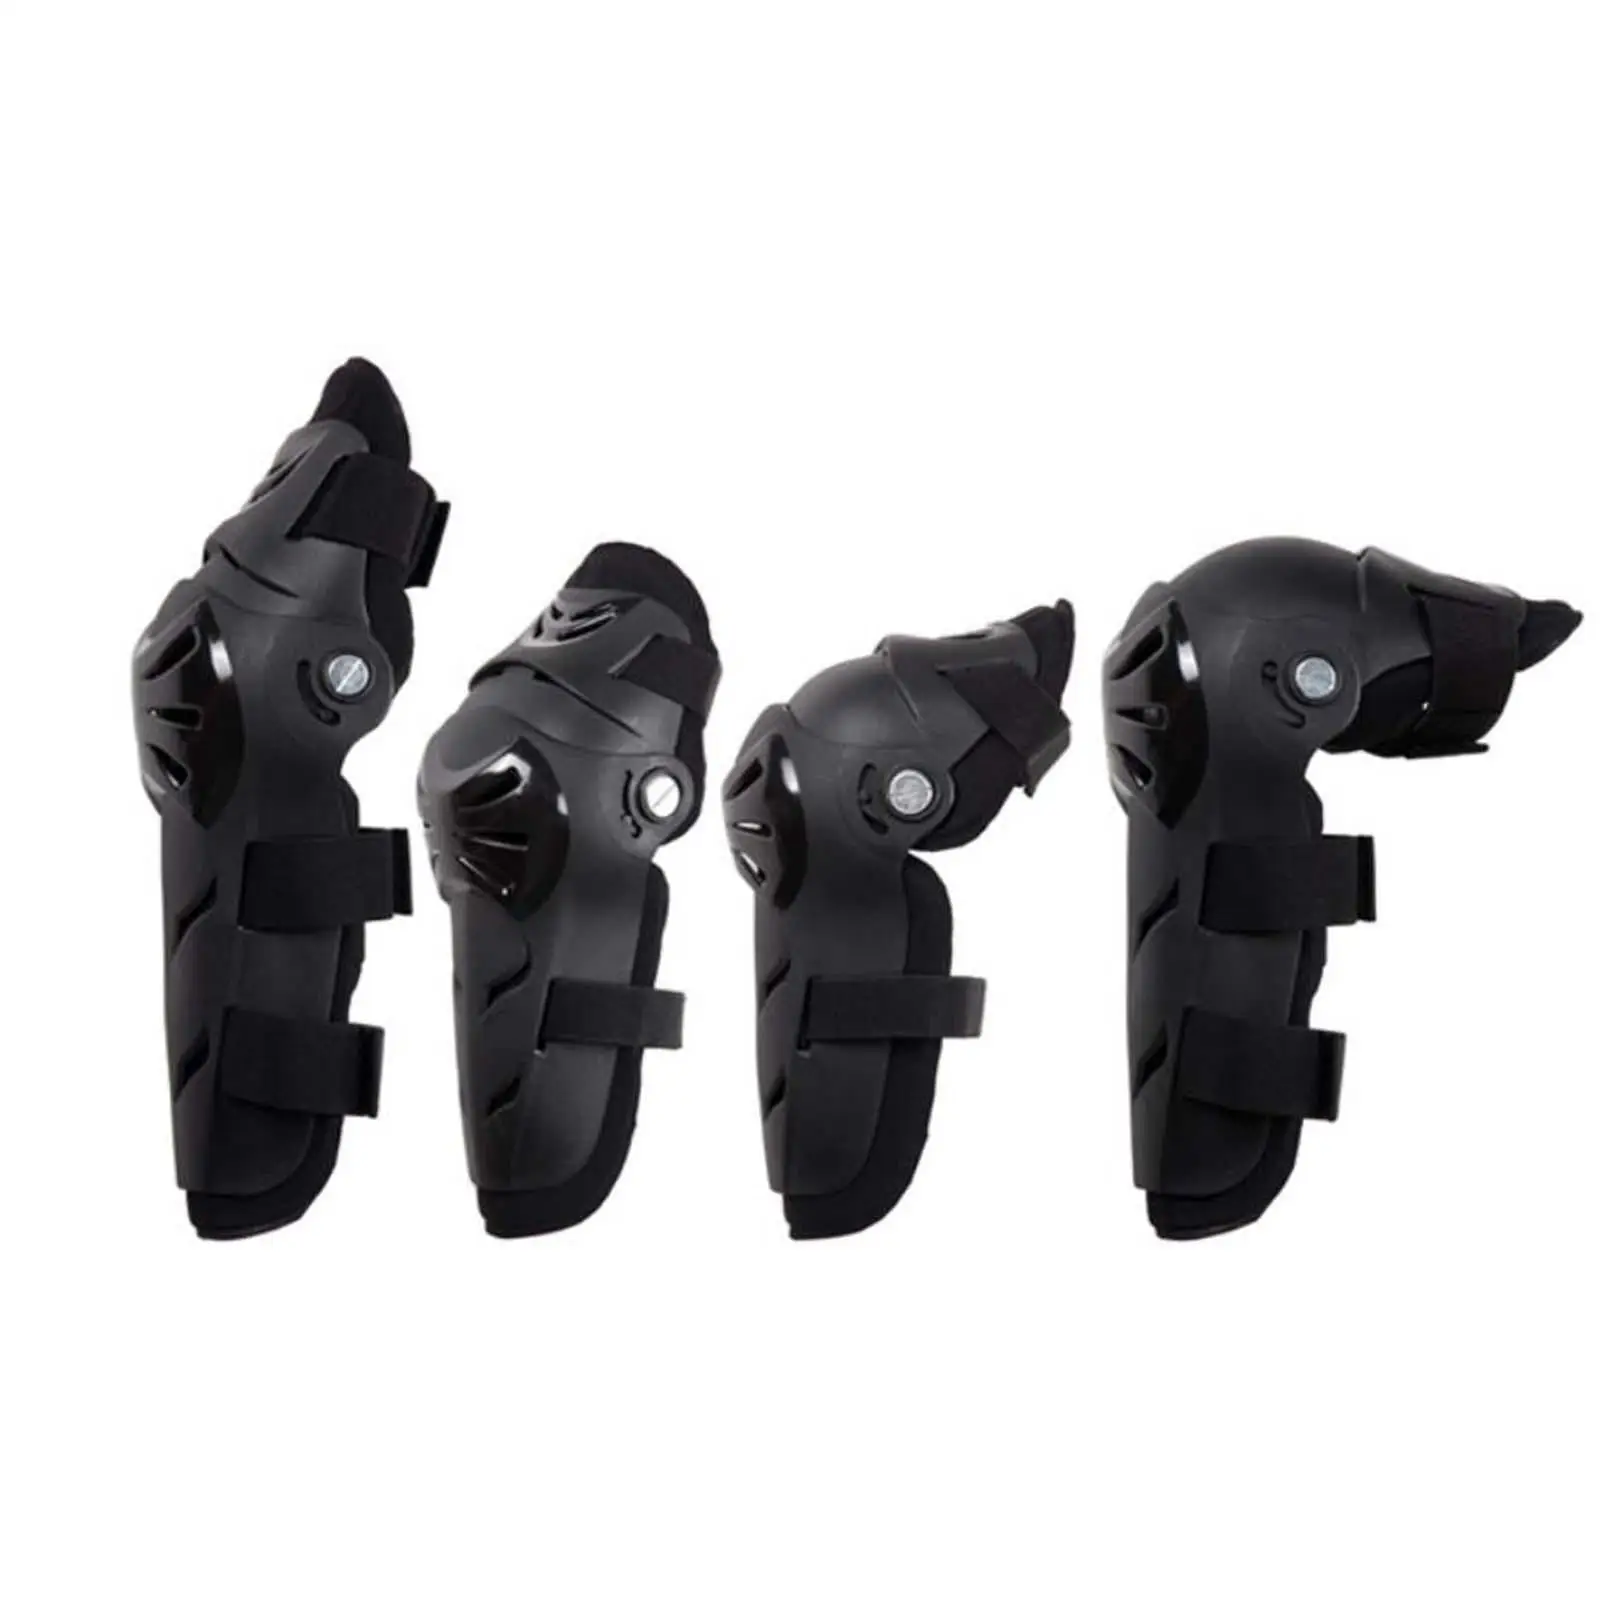 4x Motorcycle Knee Shin Guards Protective Elbow Guard Pads for Motocross Skiing Powersports Mountain Biking Motorcycle